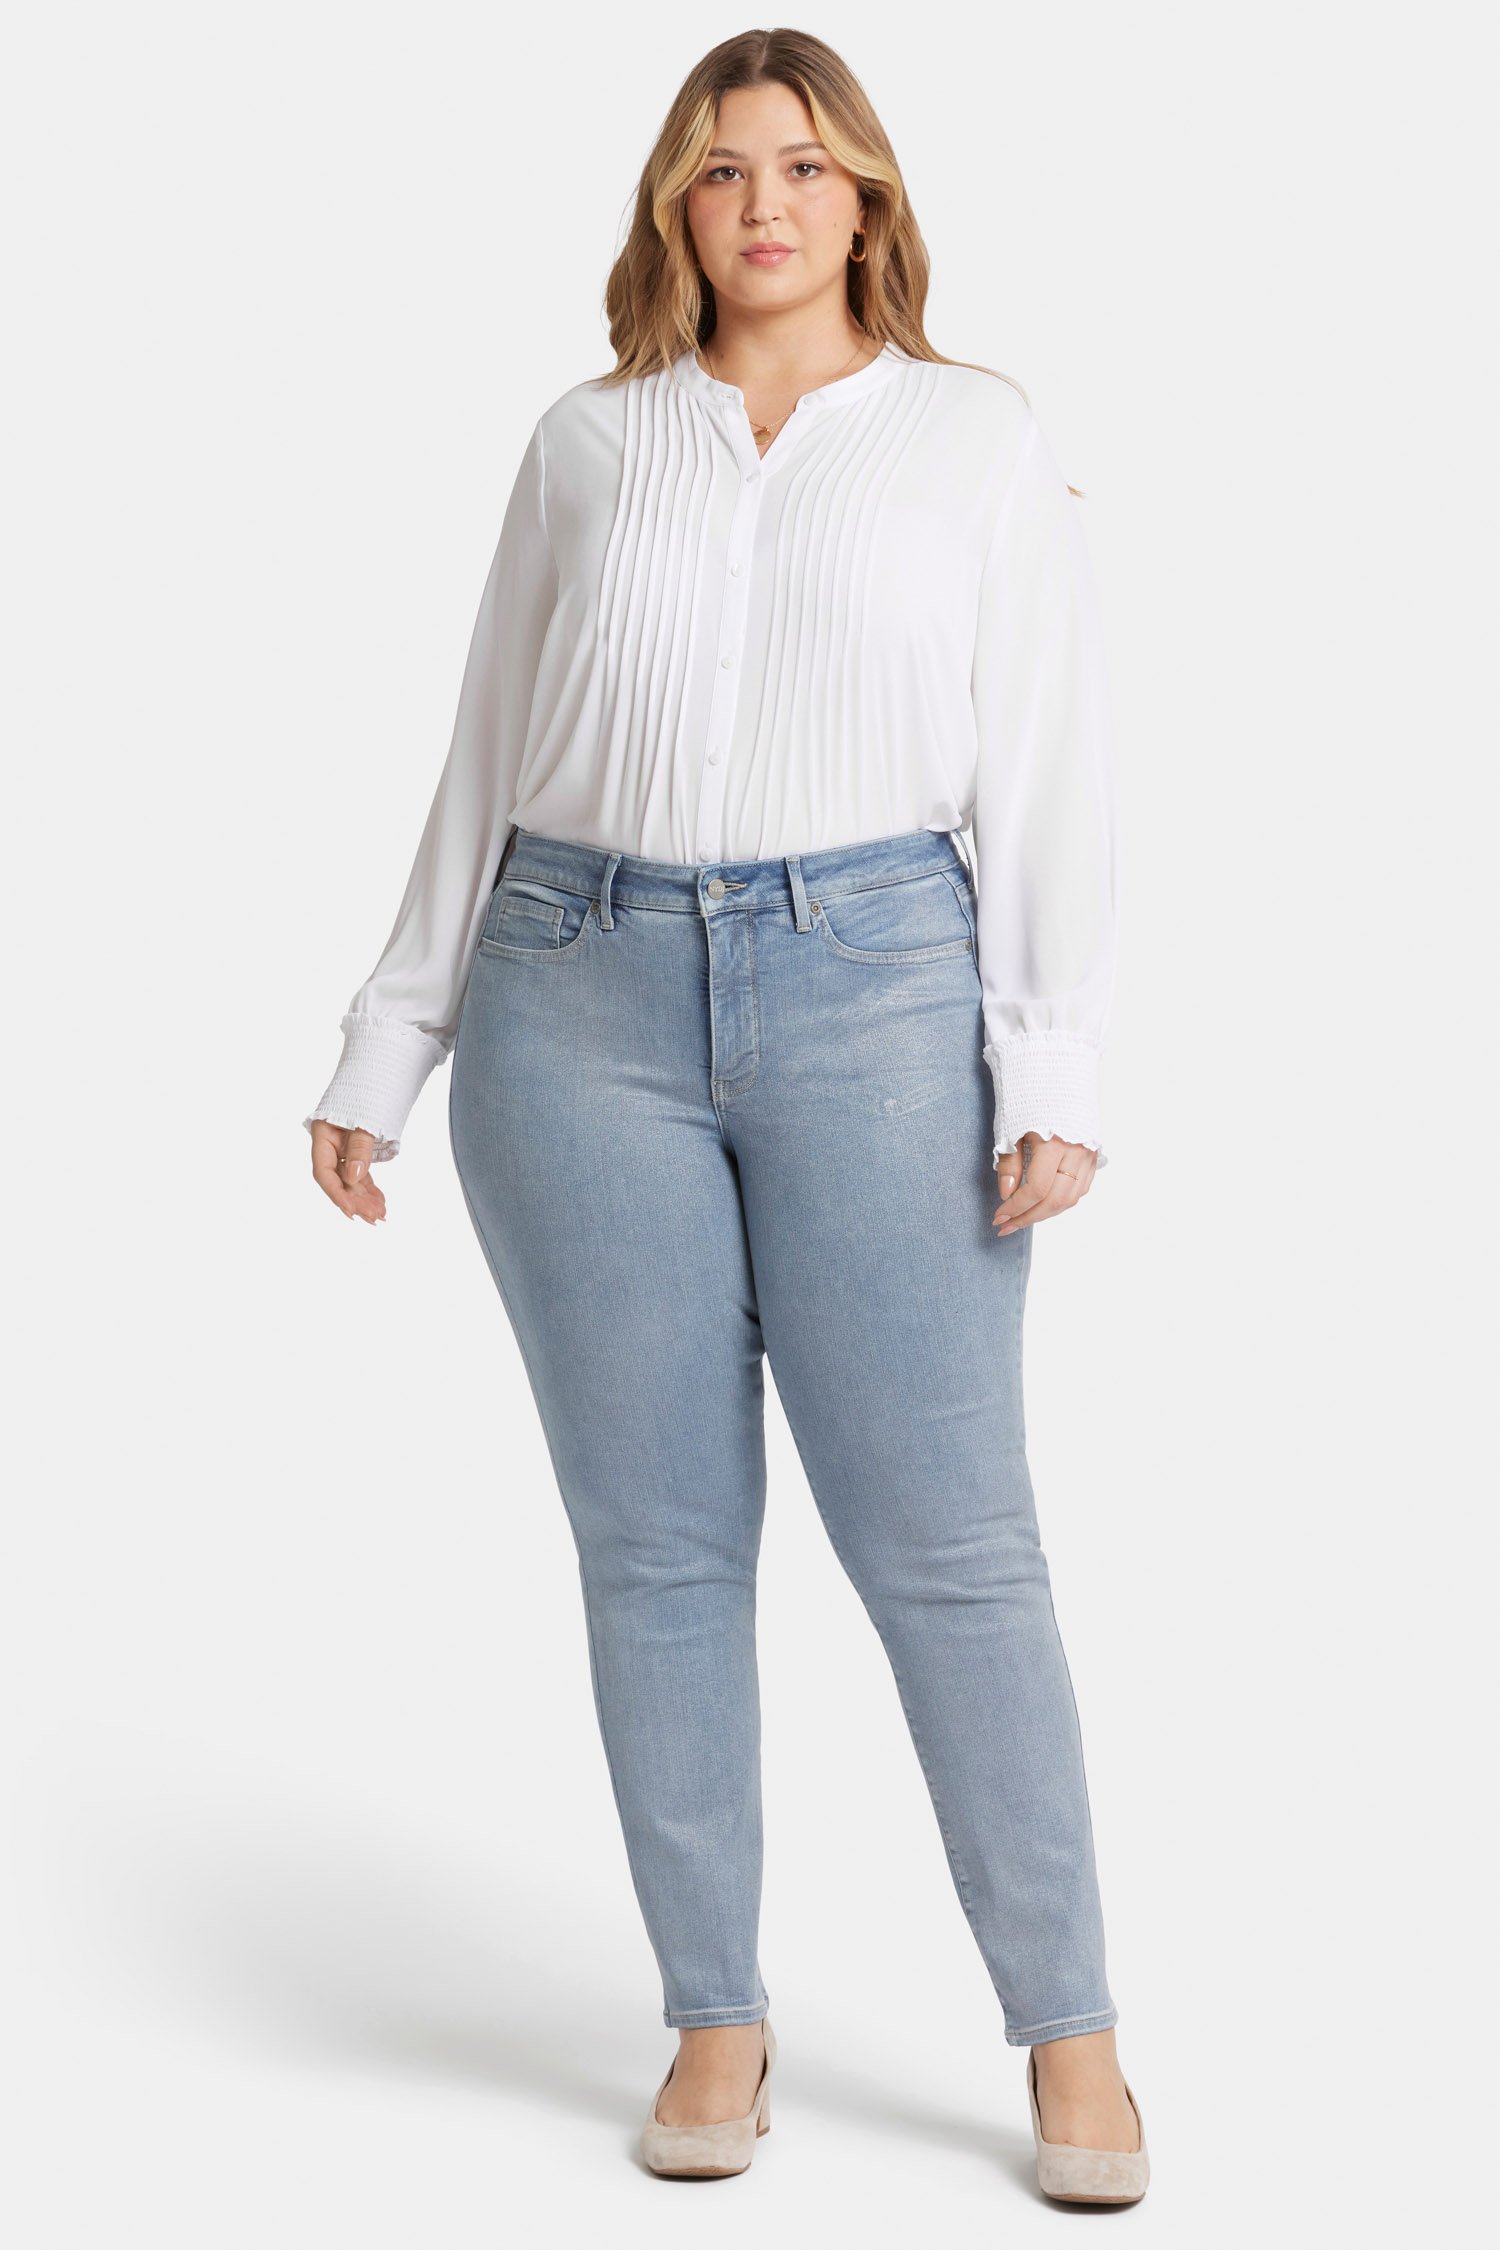 Women's Plus Size Bootcut & Flared Jeans - Ankle & Slim